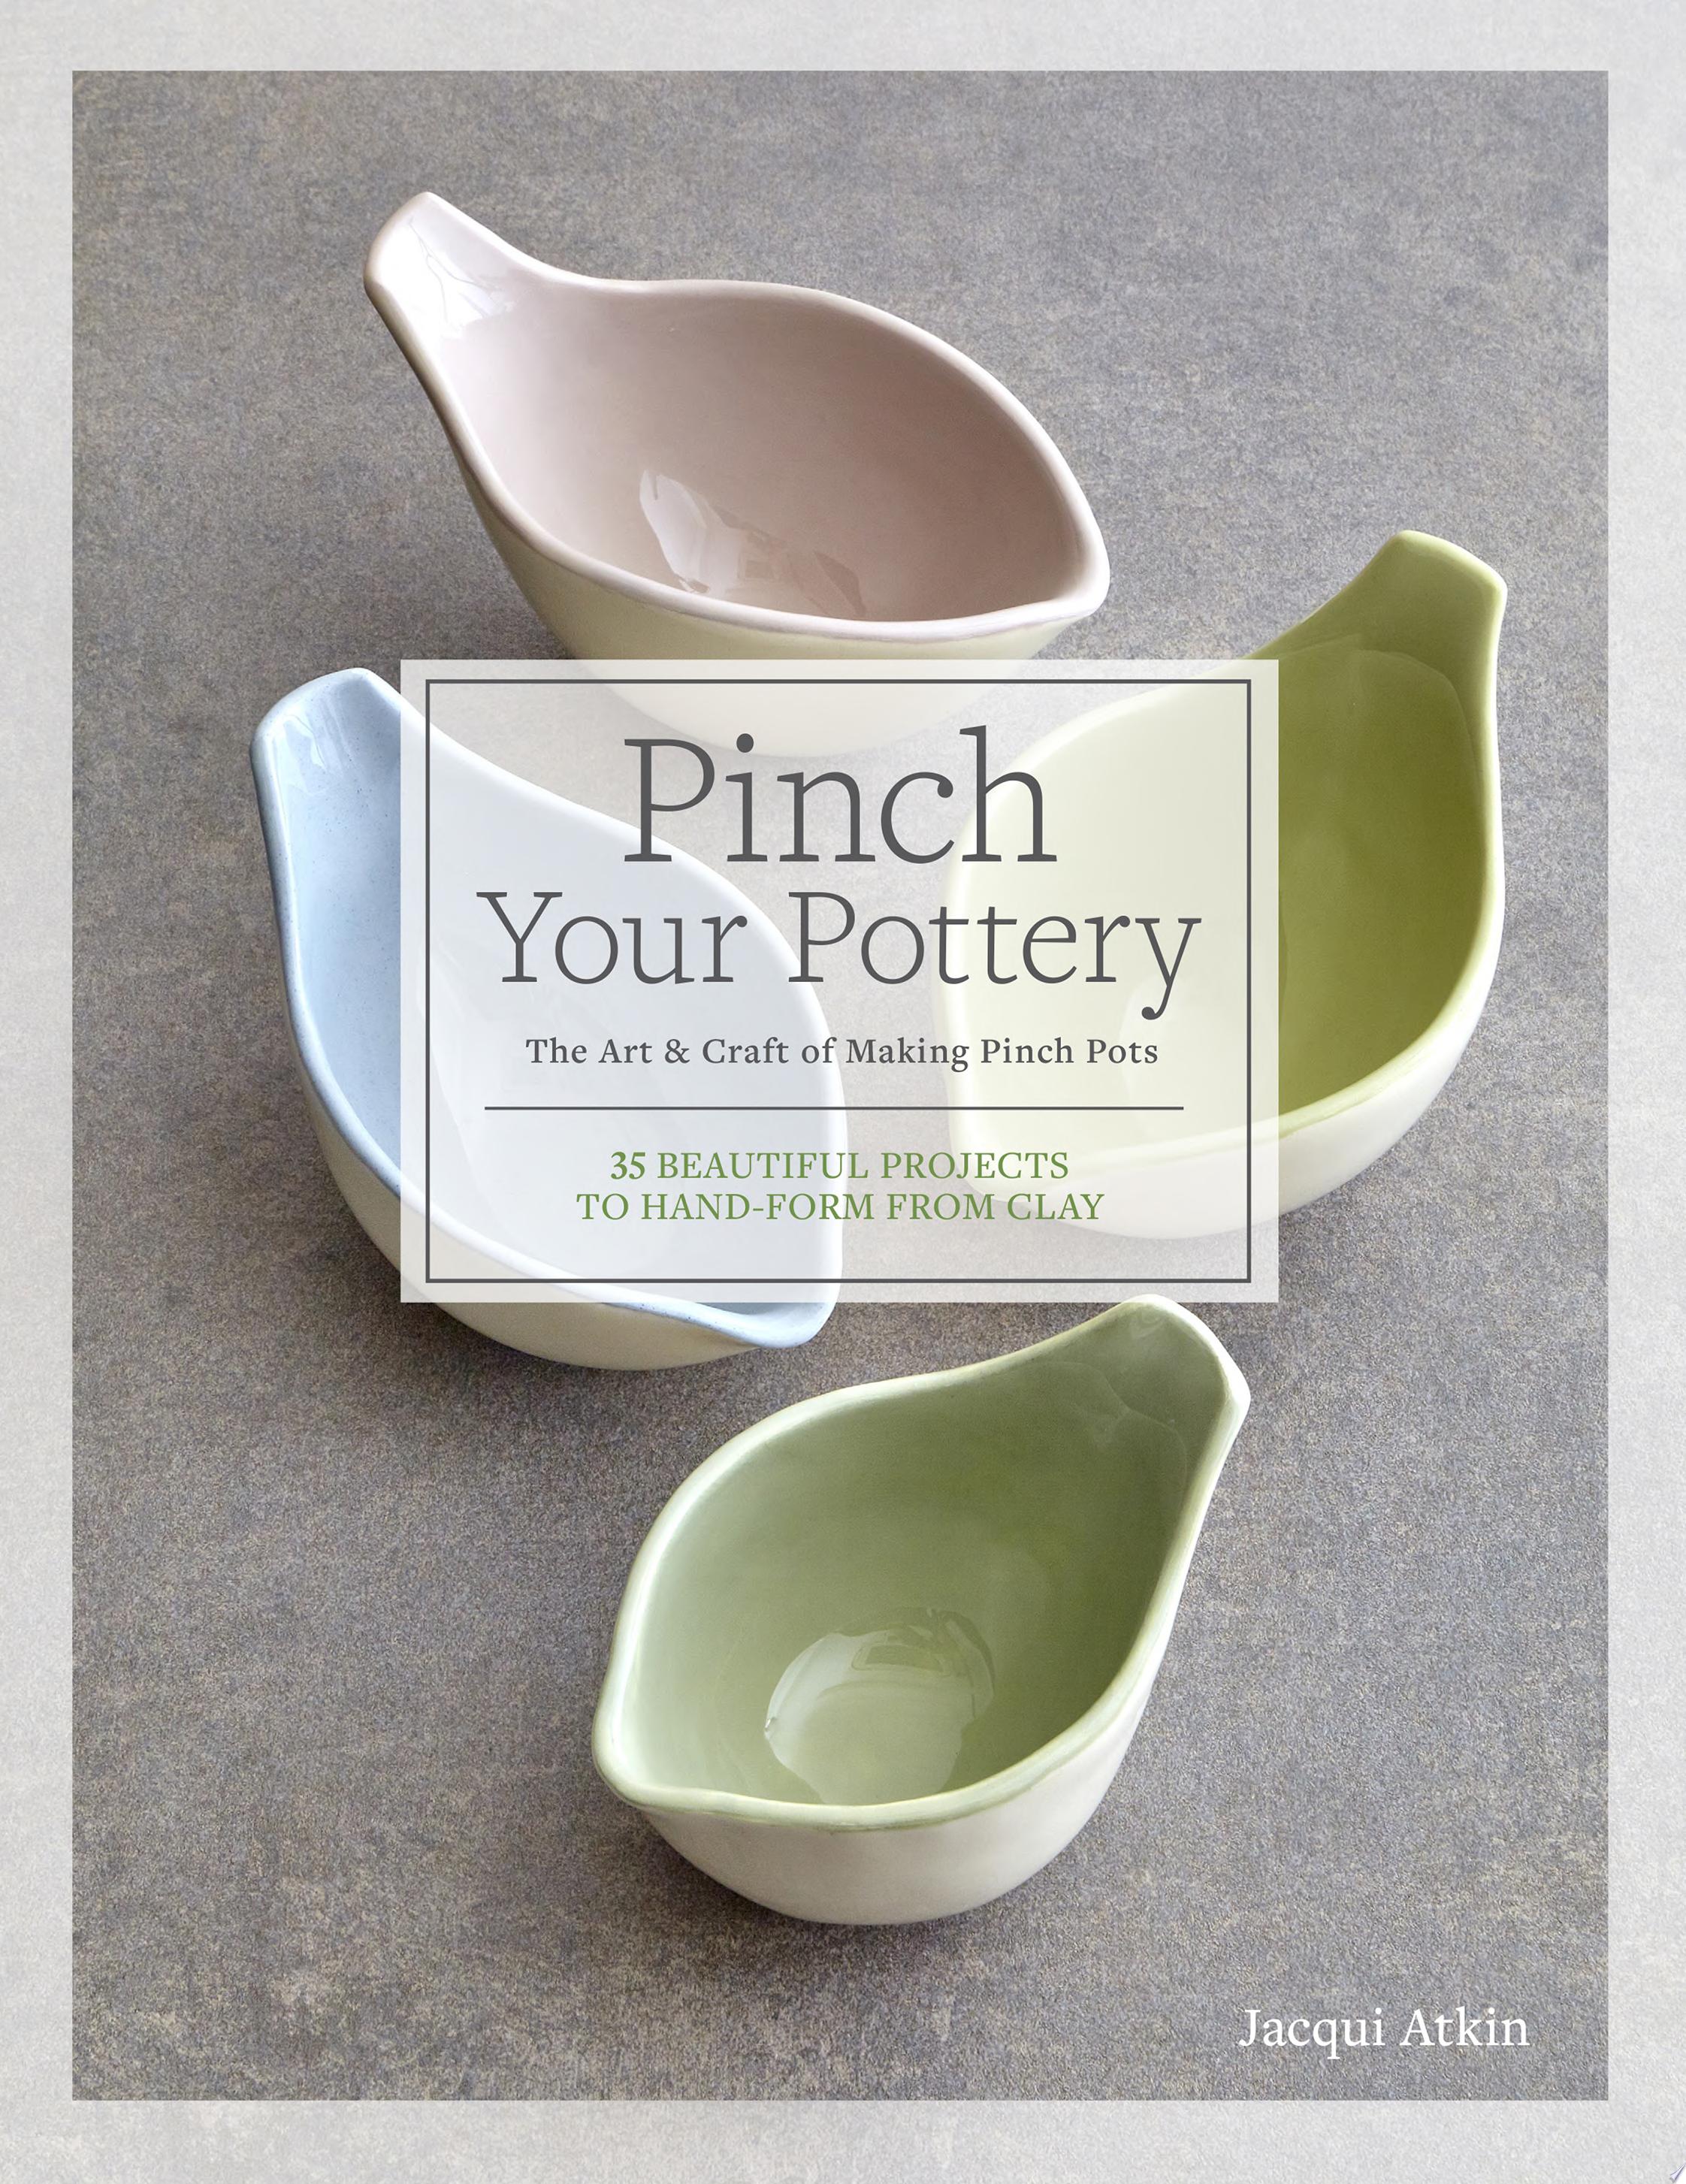 Image for "Pinch Your Pottery"